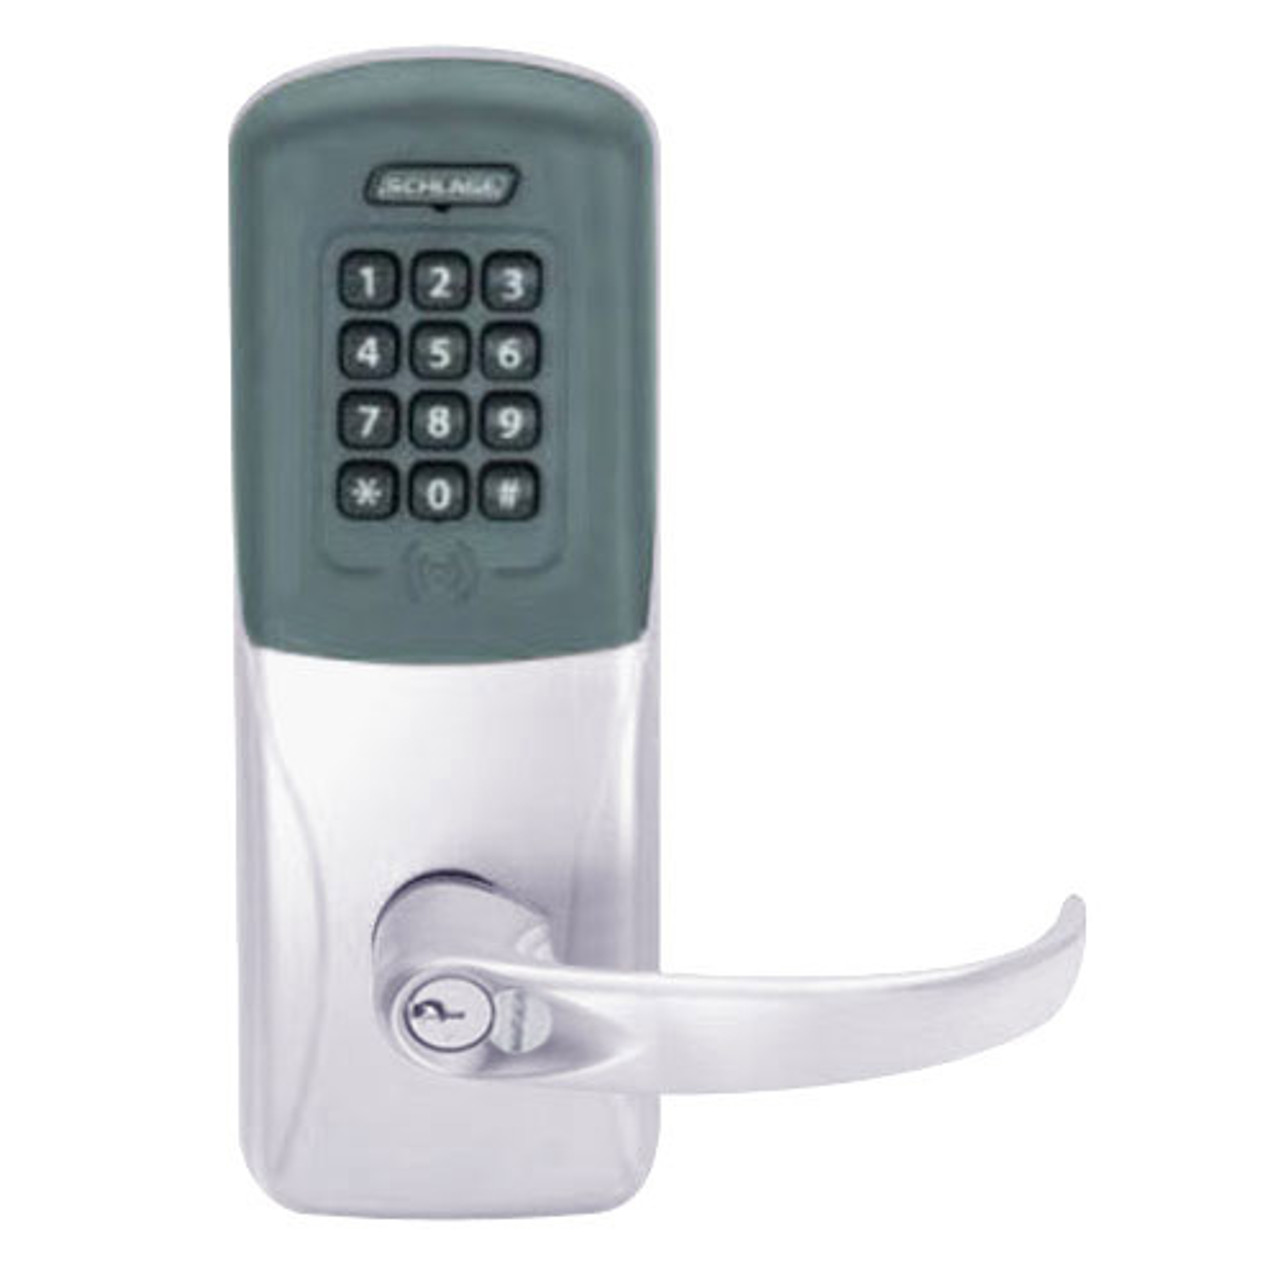 CO200-MD-40-PRK-SPA-GD-29R-626 Mortise Deadbolt Standalone Electronic Proximity with Keypad Locks in Satin Chrome